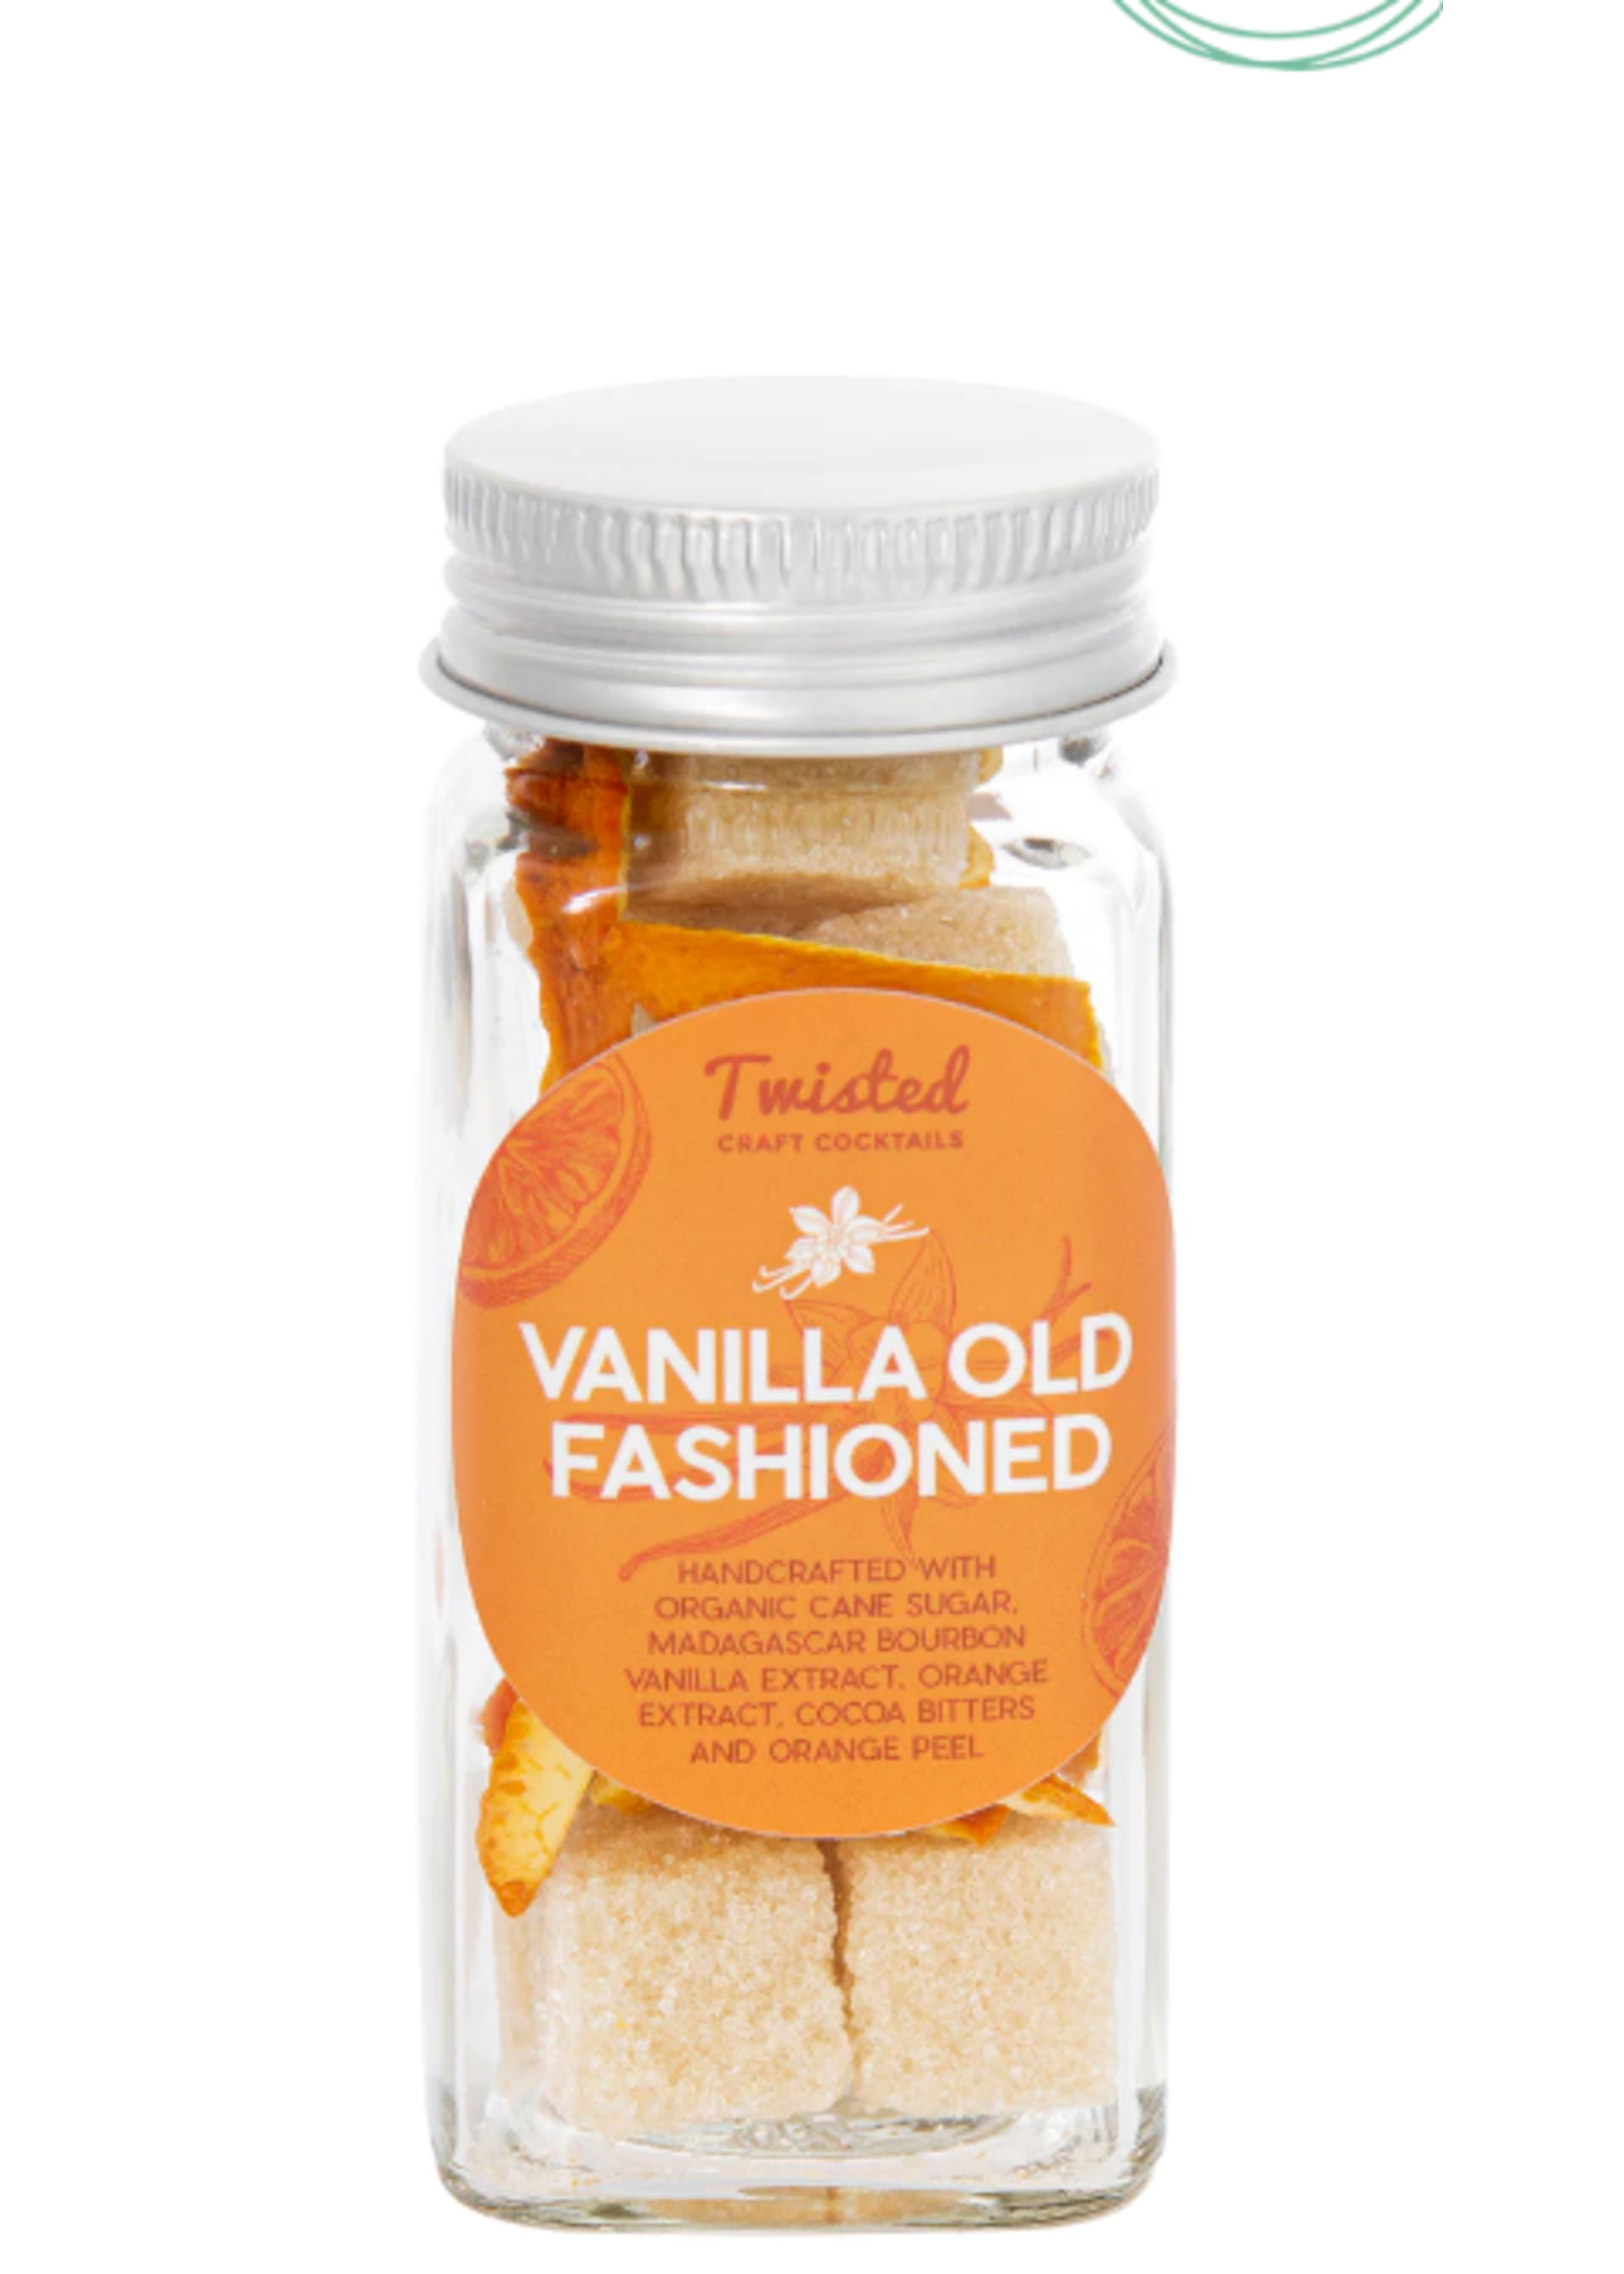 Twisted Craft Cocktails Instant Vanilla Old Fashioned